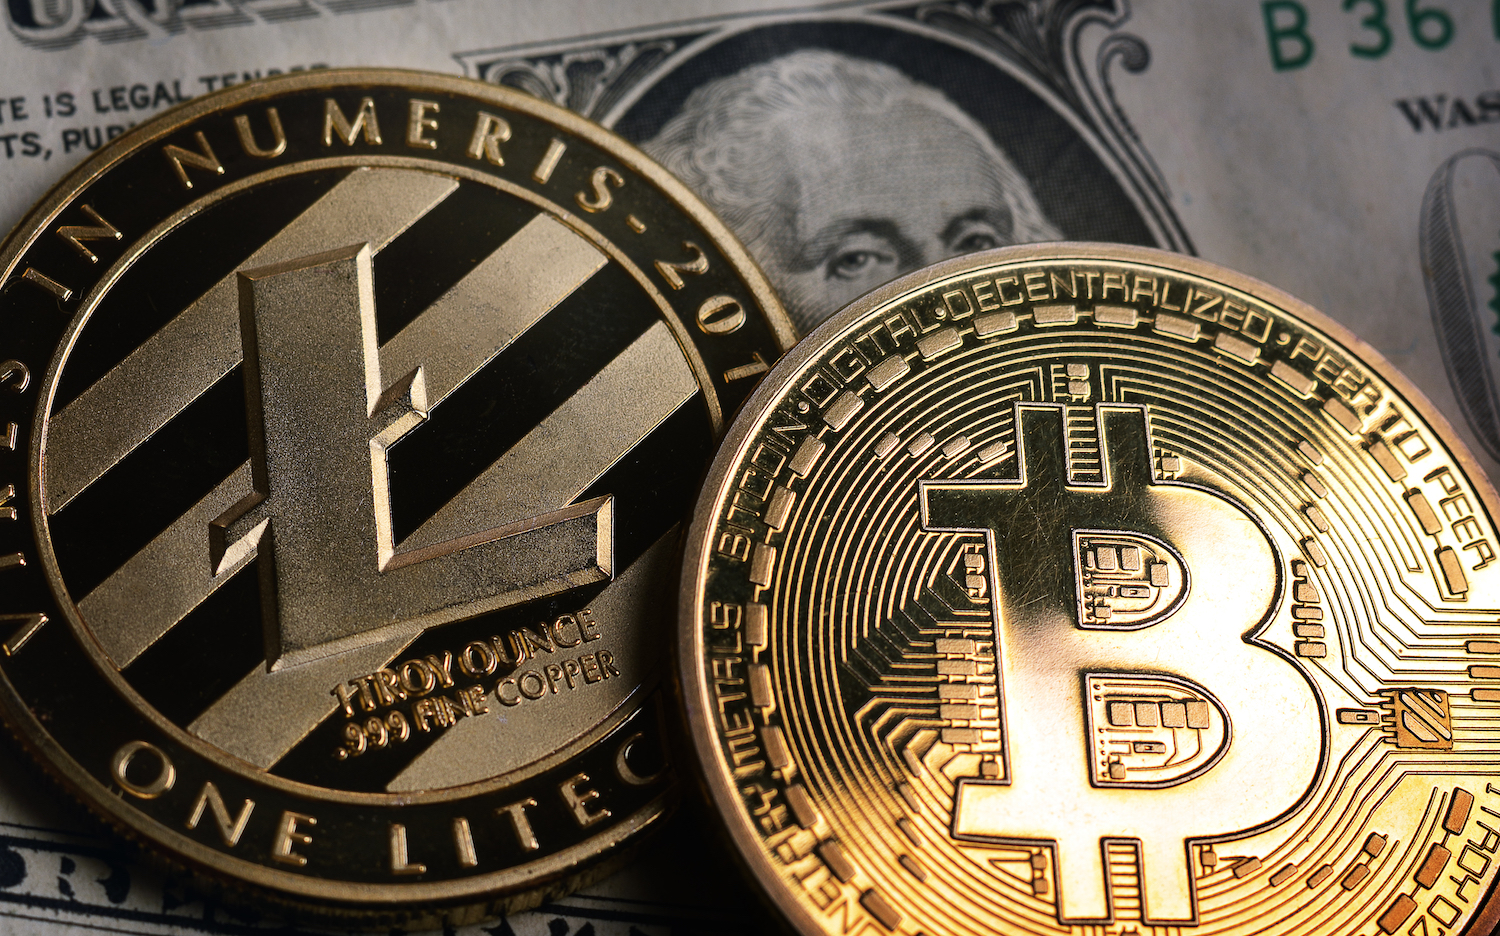 Bitcoin merged with litecoin home run derby betting previews